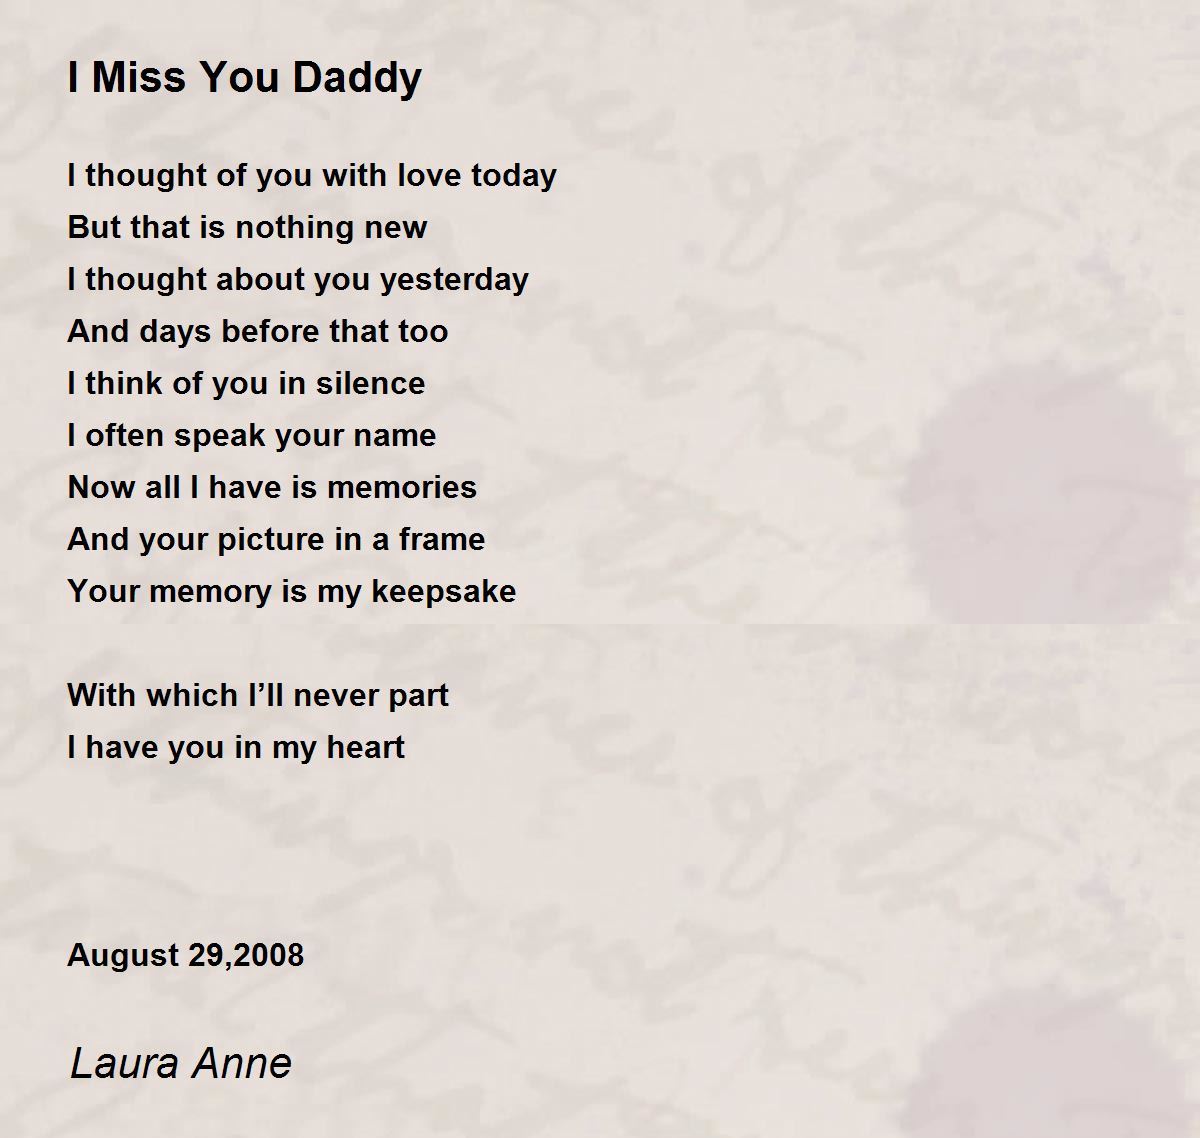 I Miss You Daddy - I Miss You Daddy Poem by Laura Anne